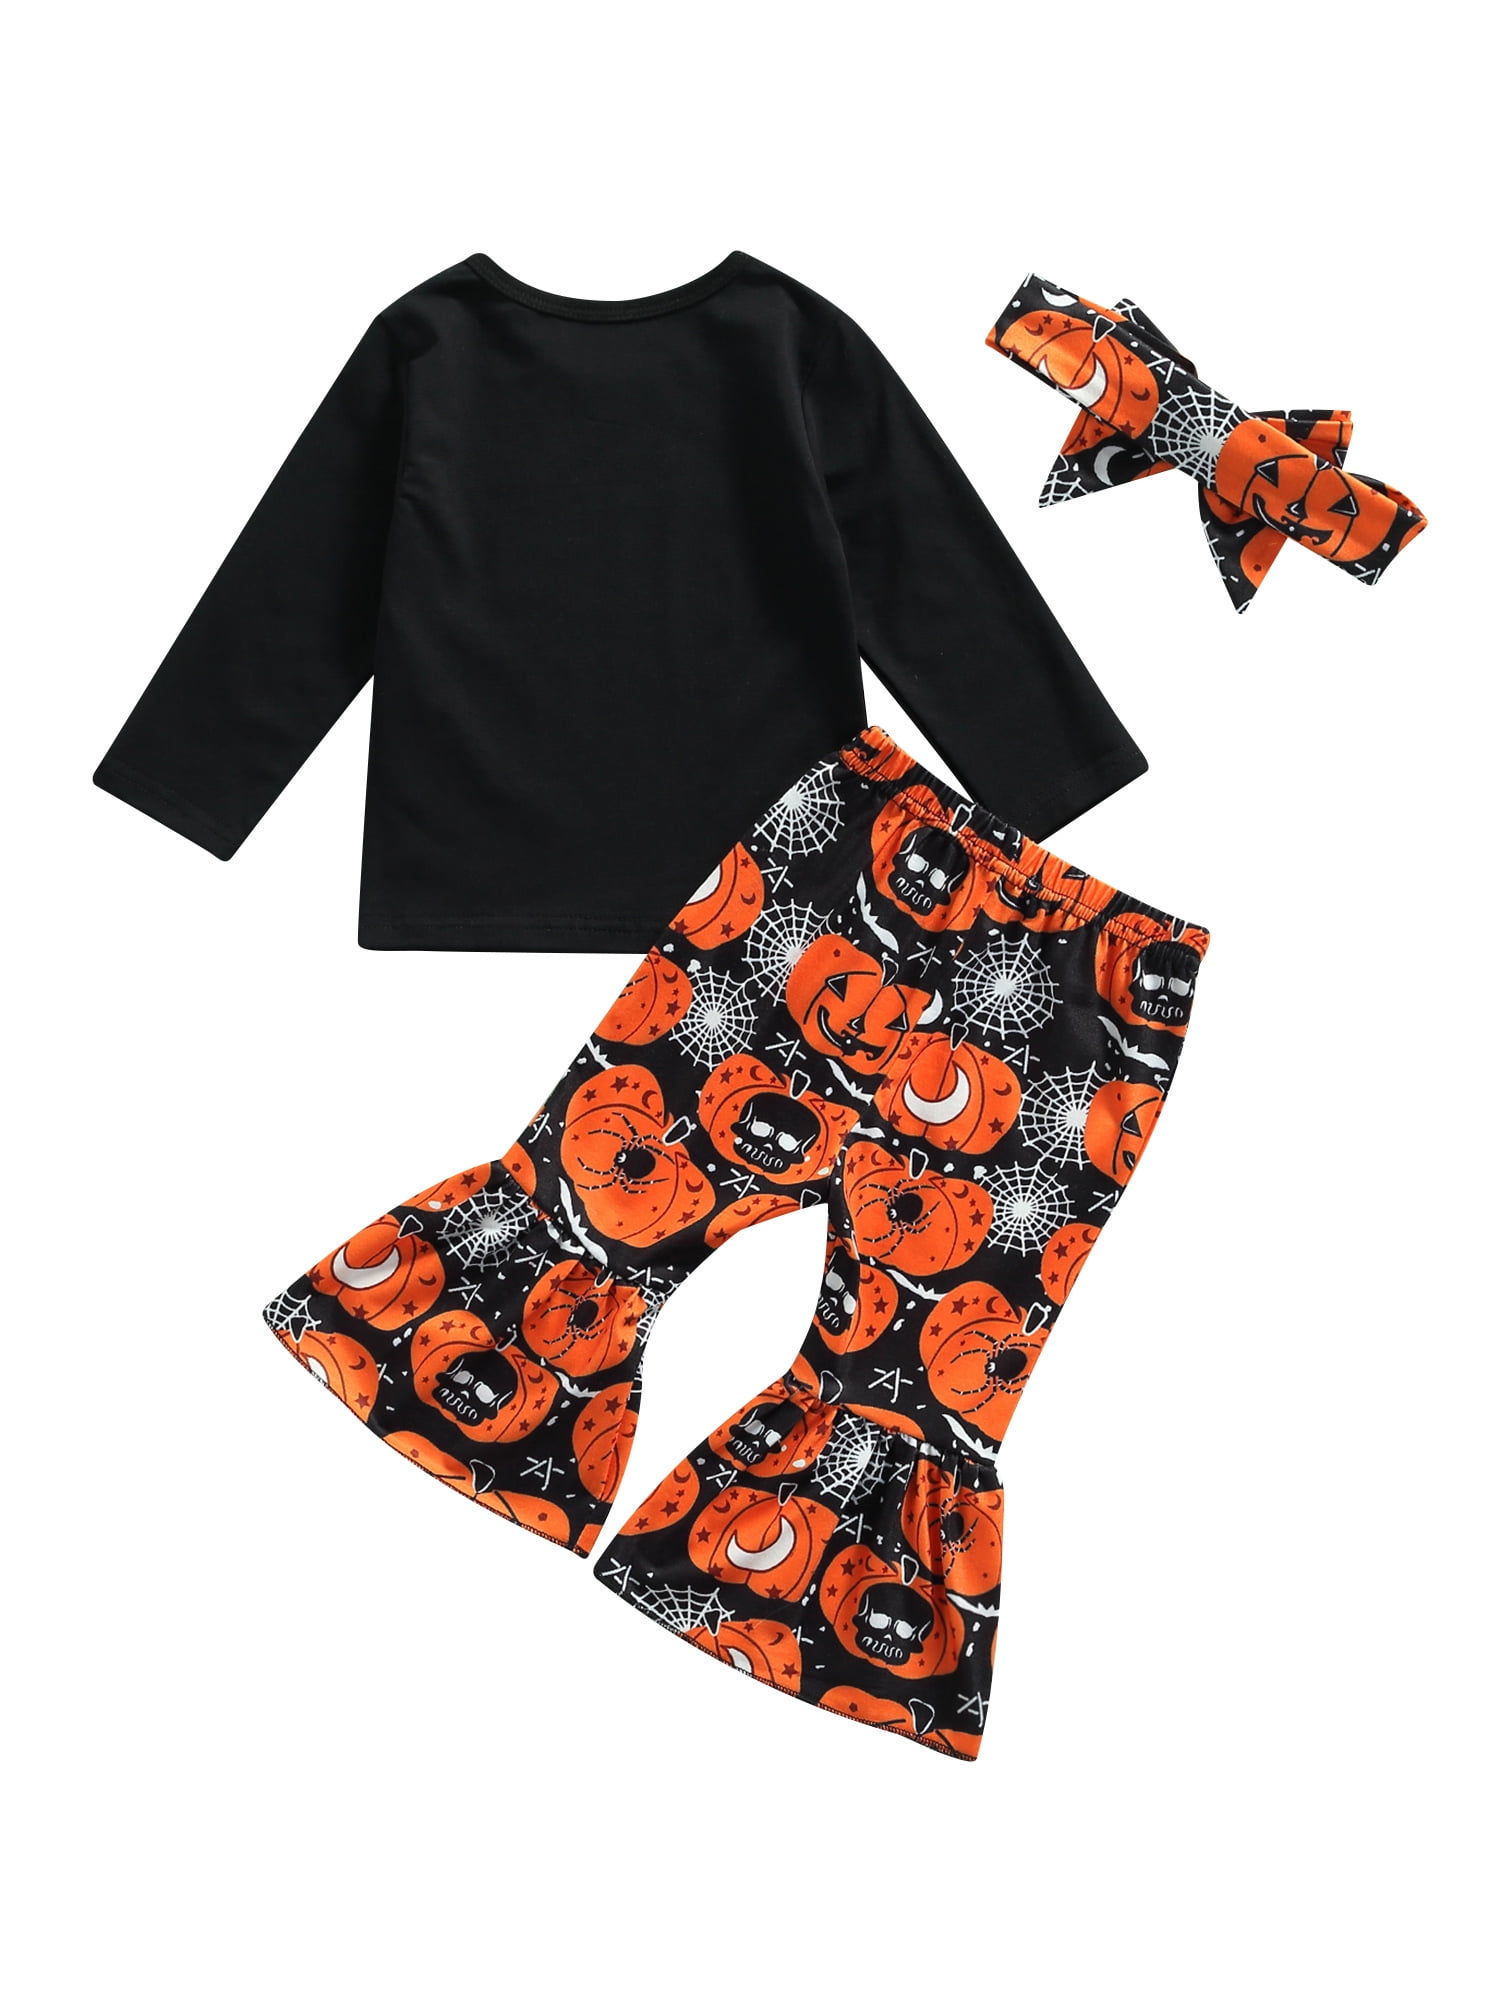 Adorable Child Girl Letter T-Shirt Lace Printed Trumpet Pants Outfits Kids Thanksgiving Day Long Top & Pants Set 